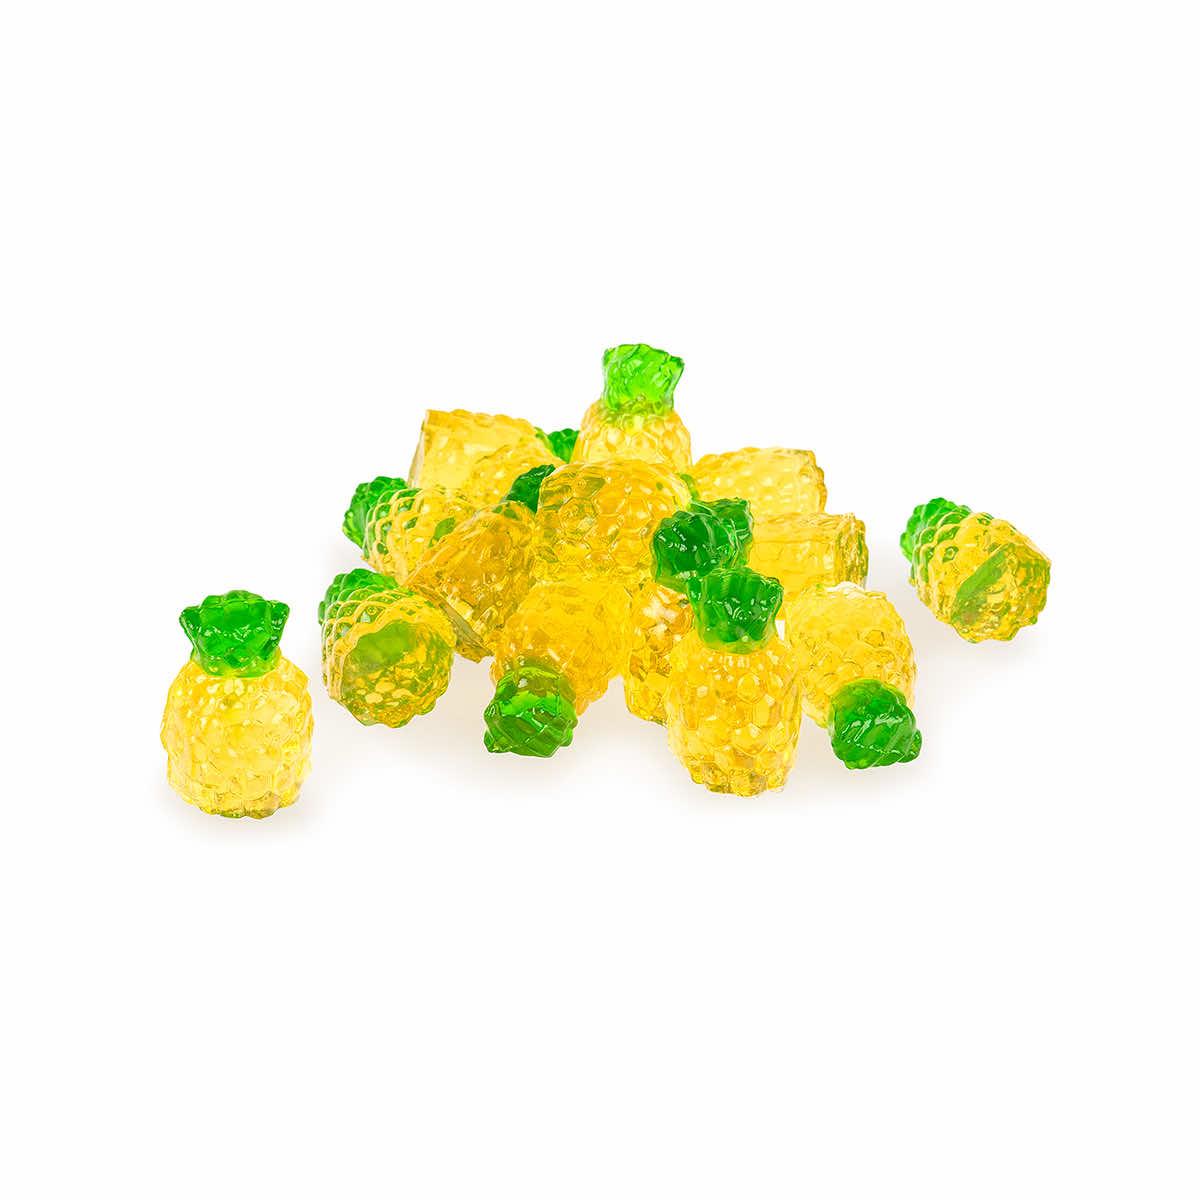 These 3D Gummy Pineapples! : r/KnightsOfPineapple